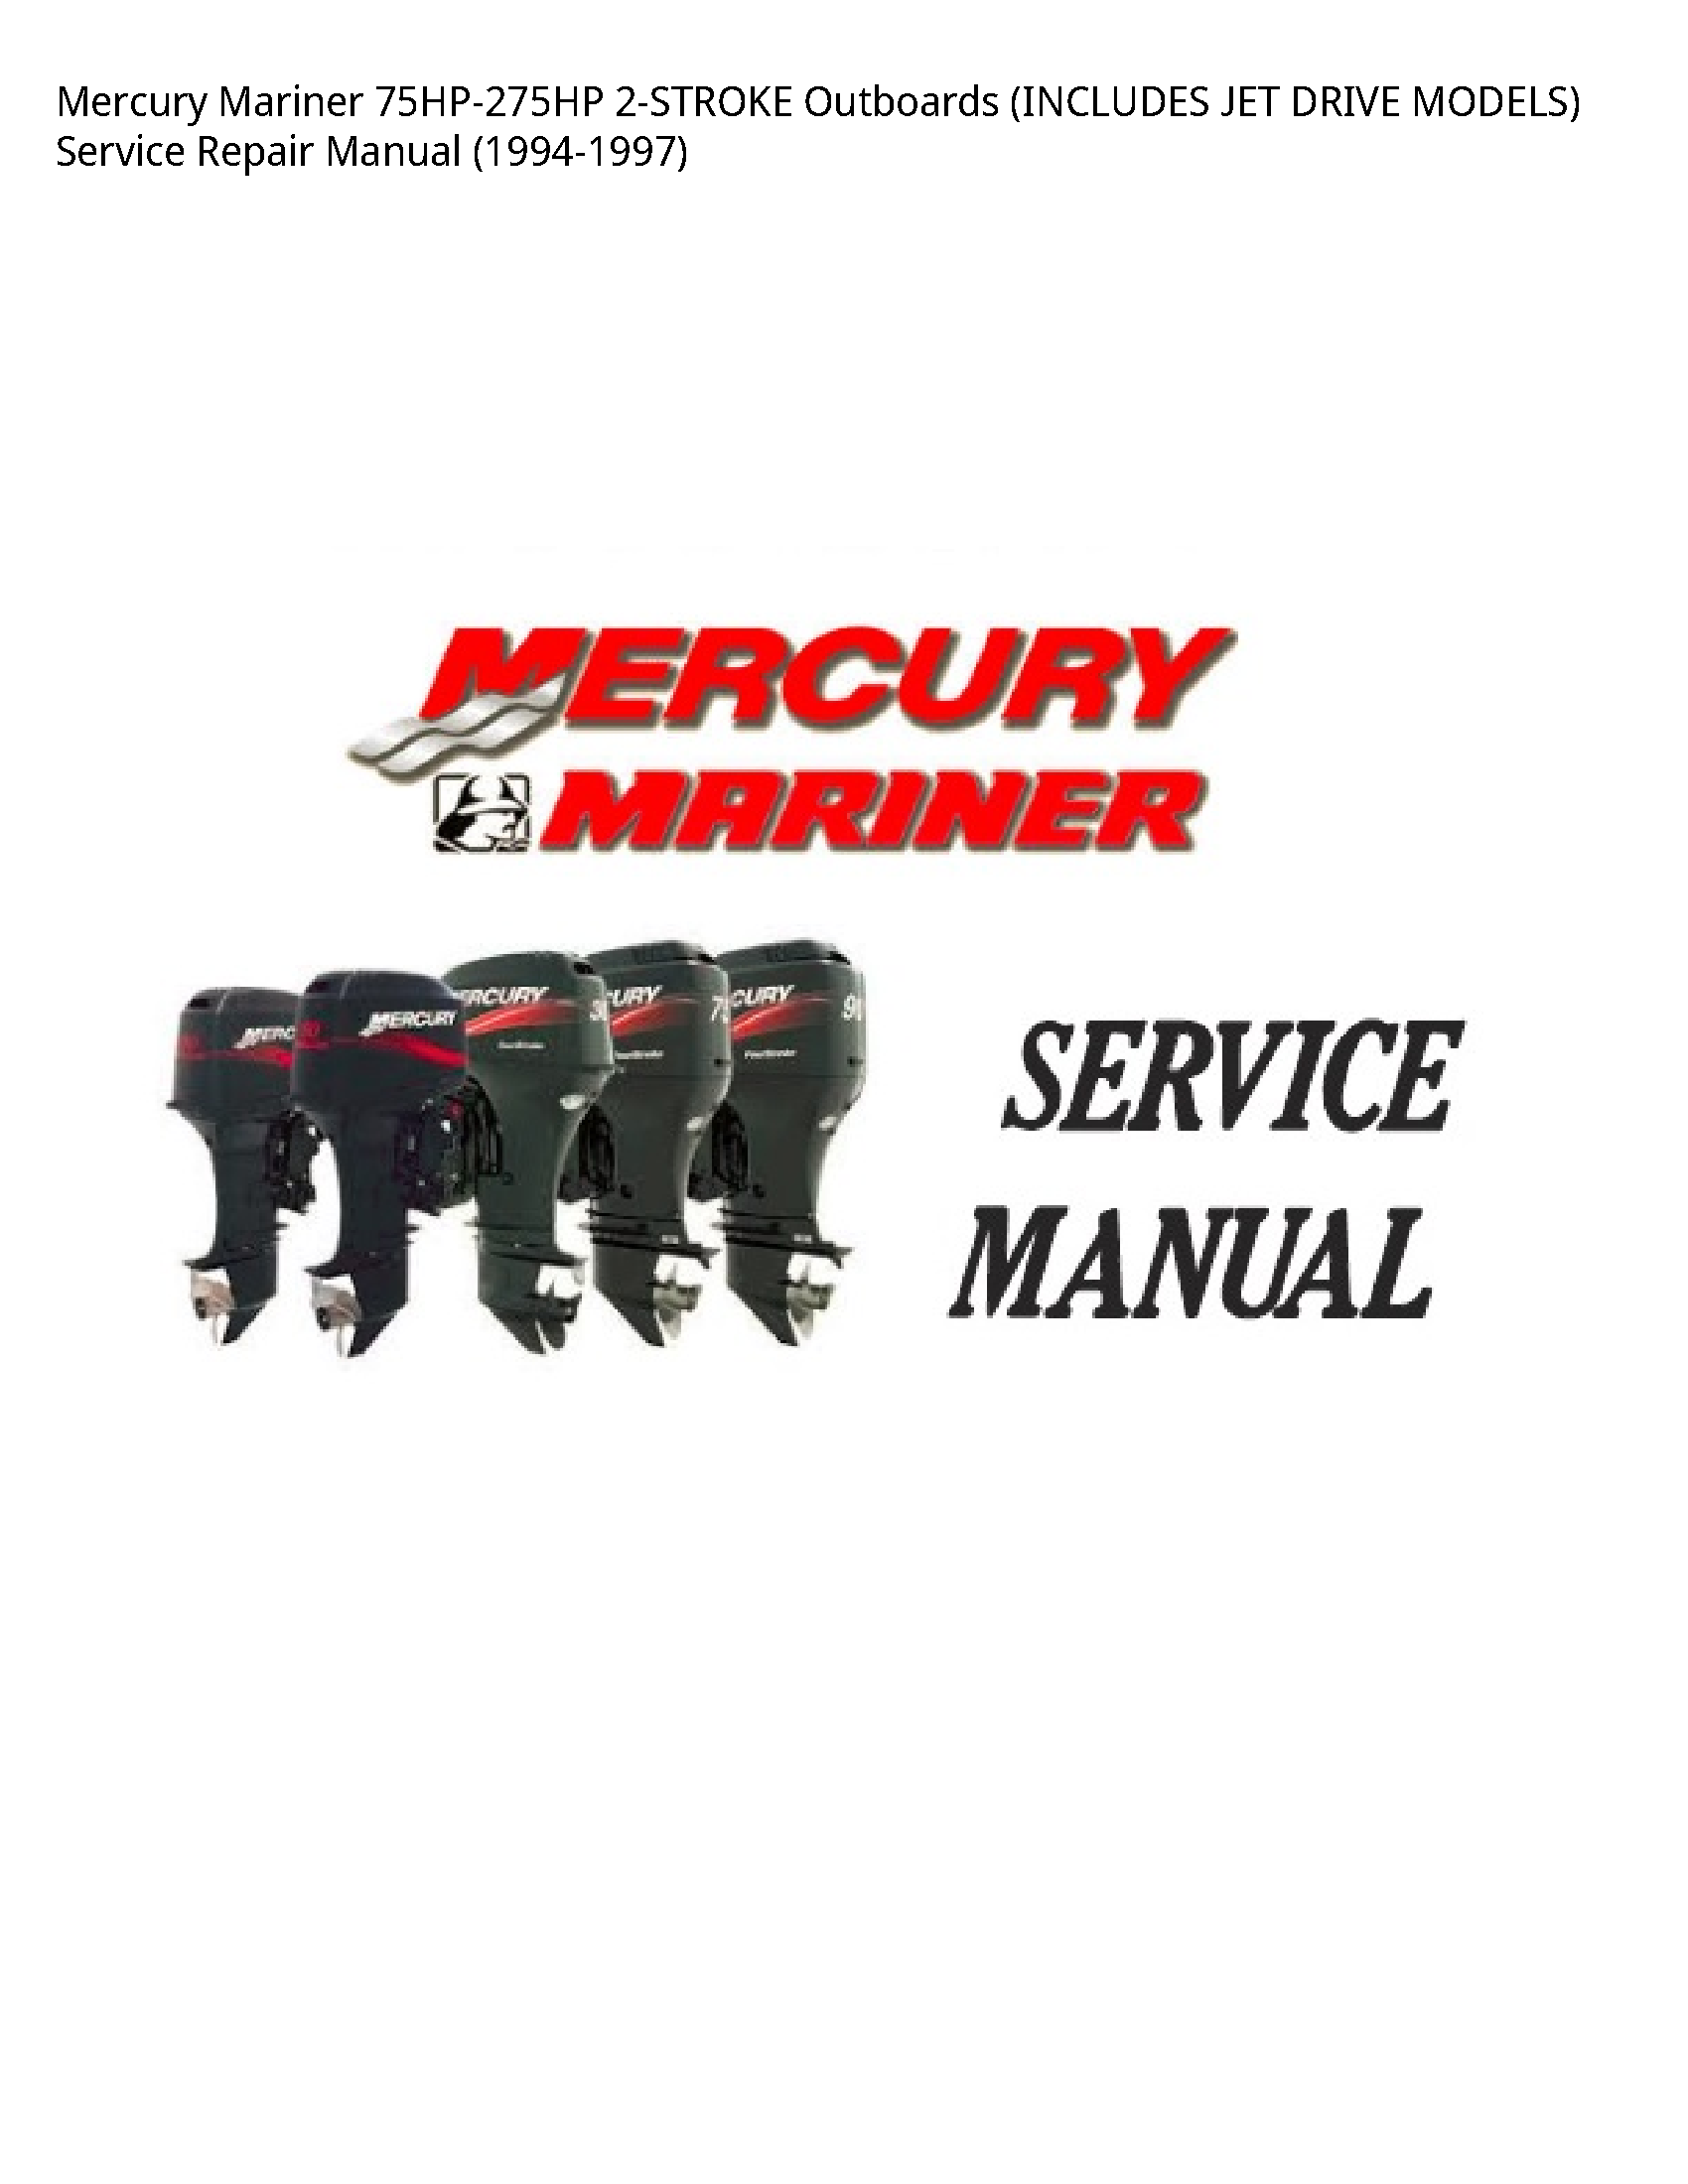 Mercury Mariner 75HP-275HP Outboards (INCLUDES JET DRIVE MODELS) manual